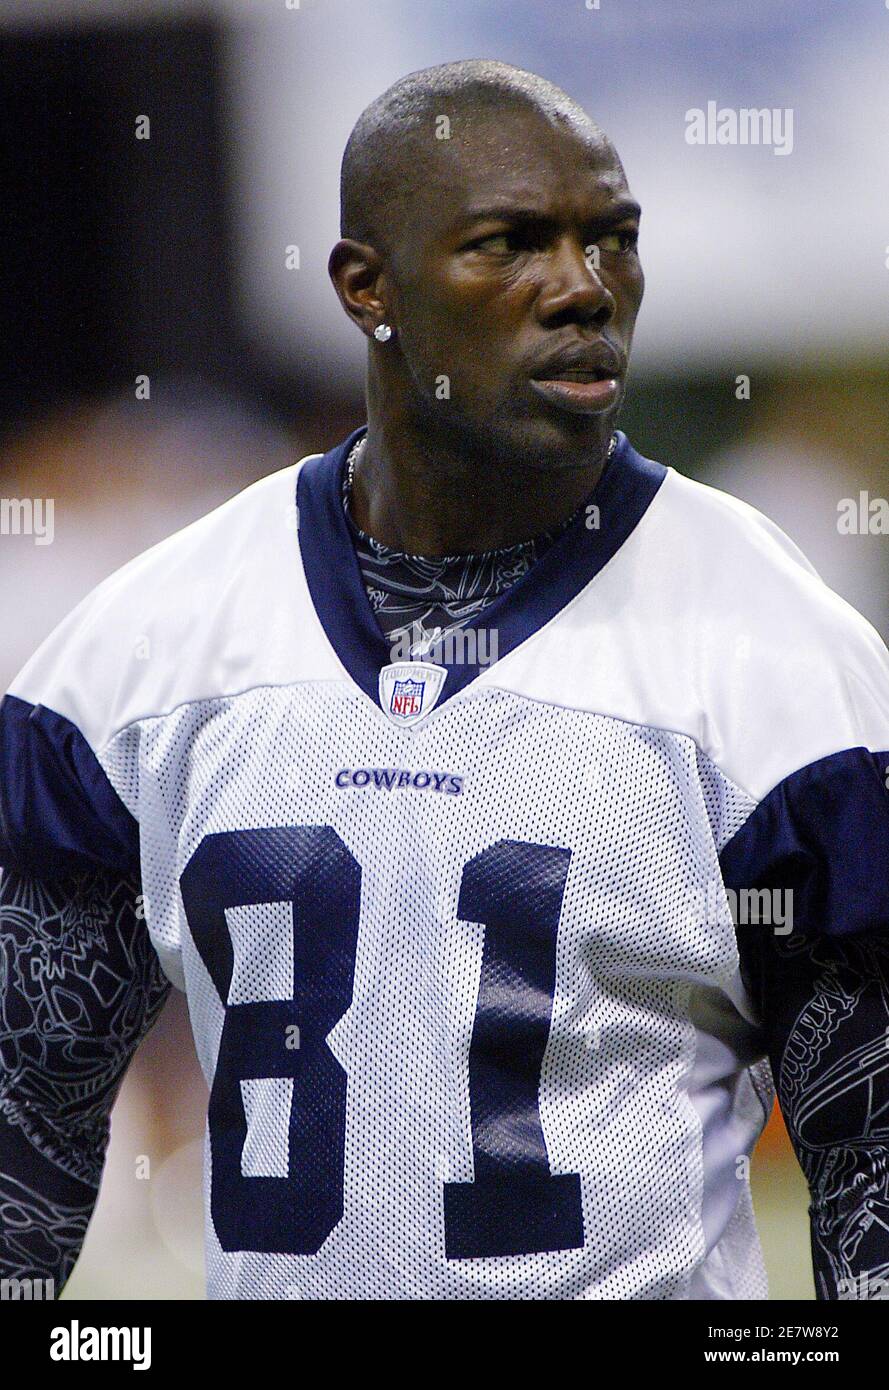 Dallas Cowboys wide receiver Terrell Owens on the opening day of the Dallas Cowboys NFL training camp in San Antonio, TX., Wednesday, July 25, 2007 REUTERS/Joe Mitchell (UNITED STATES) Stock Photo